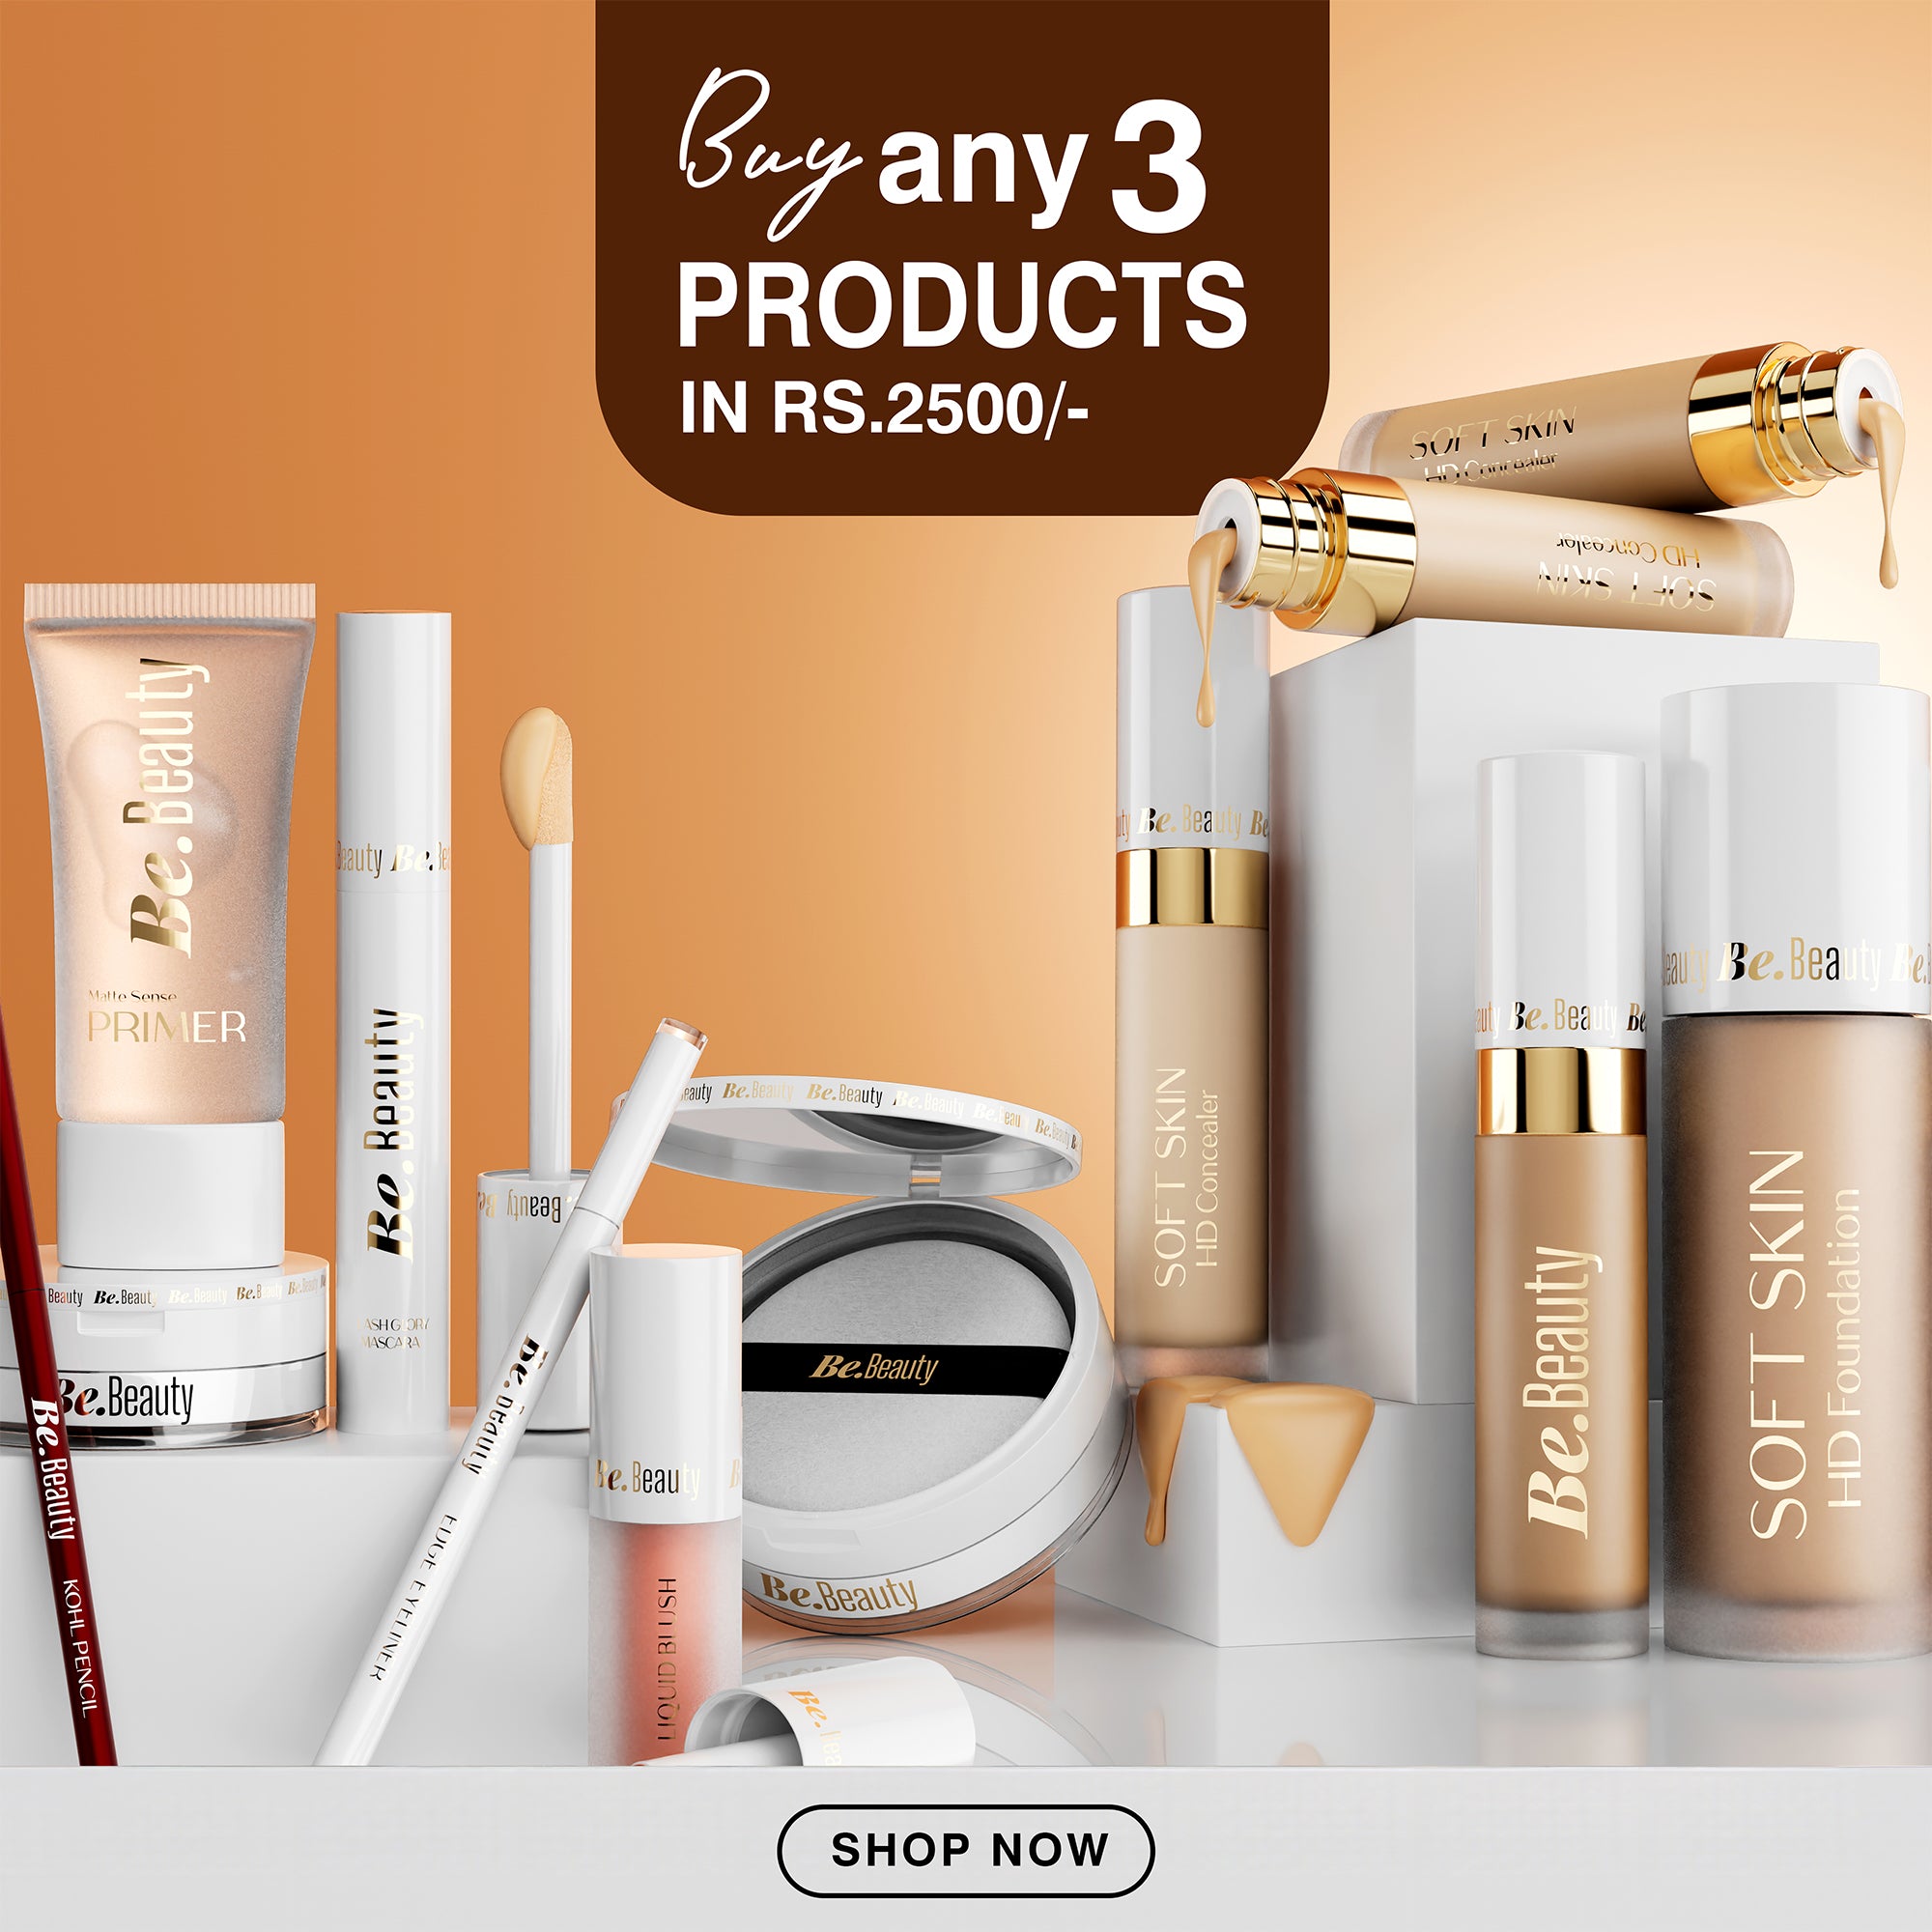 BeBeauty - Buy Any 3 Products in Rs.2500